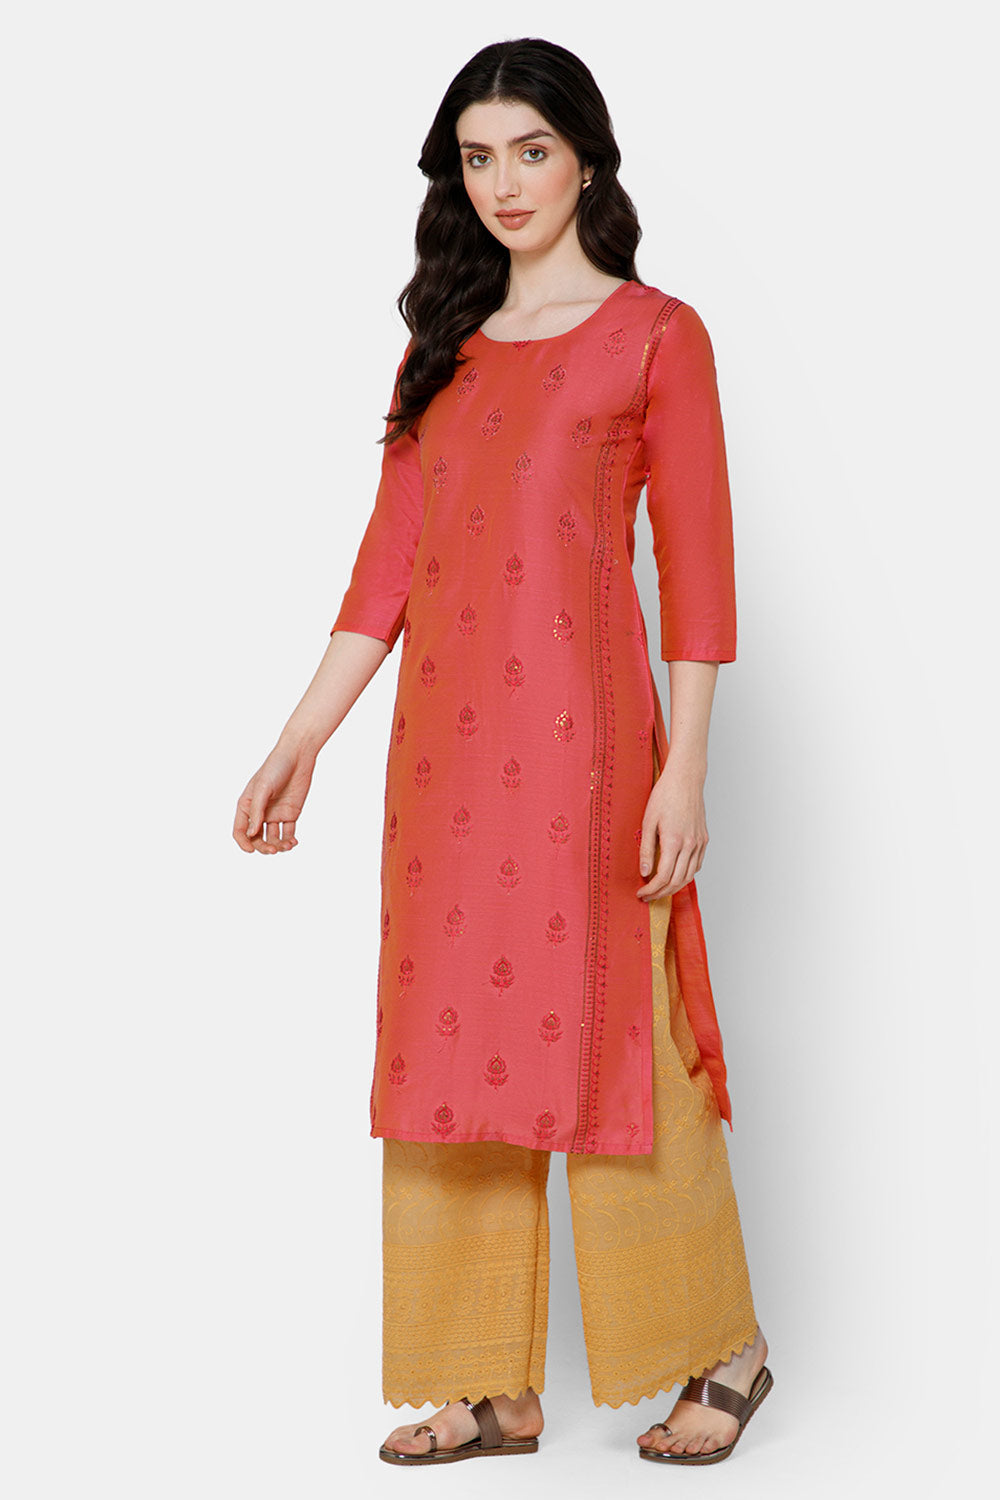 Mythri Women's Ethnic wear with Sequins Embroidery - Peach - E039